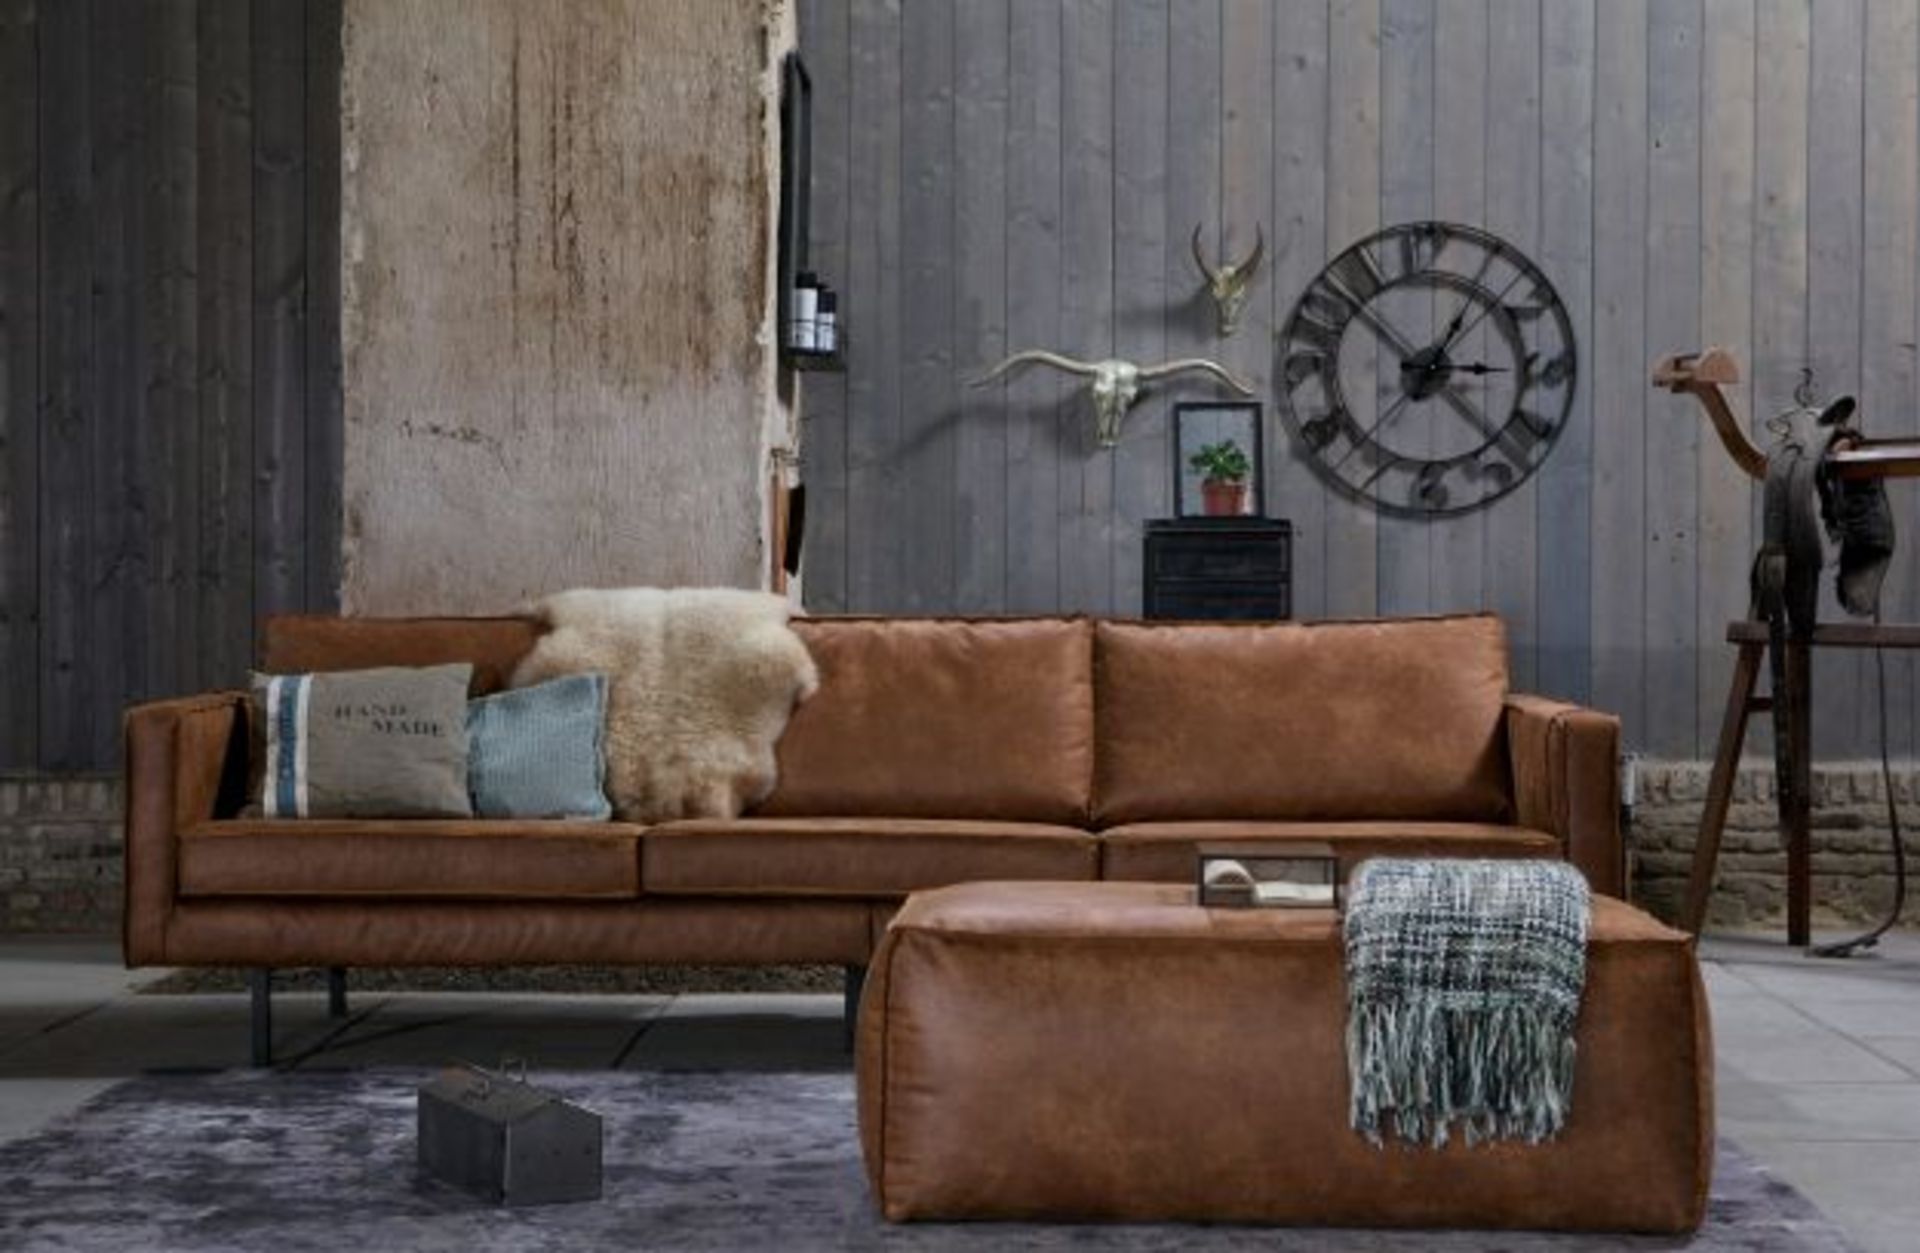 1 x 'Rodeo' Contemporary 3-Seater Leather Sofa In Cognac Brown - Original RRP £1,199.00 - Image 4 of 4